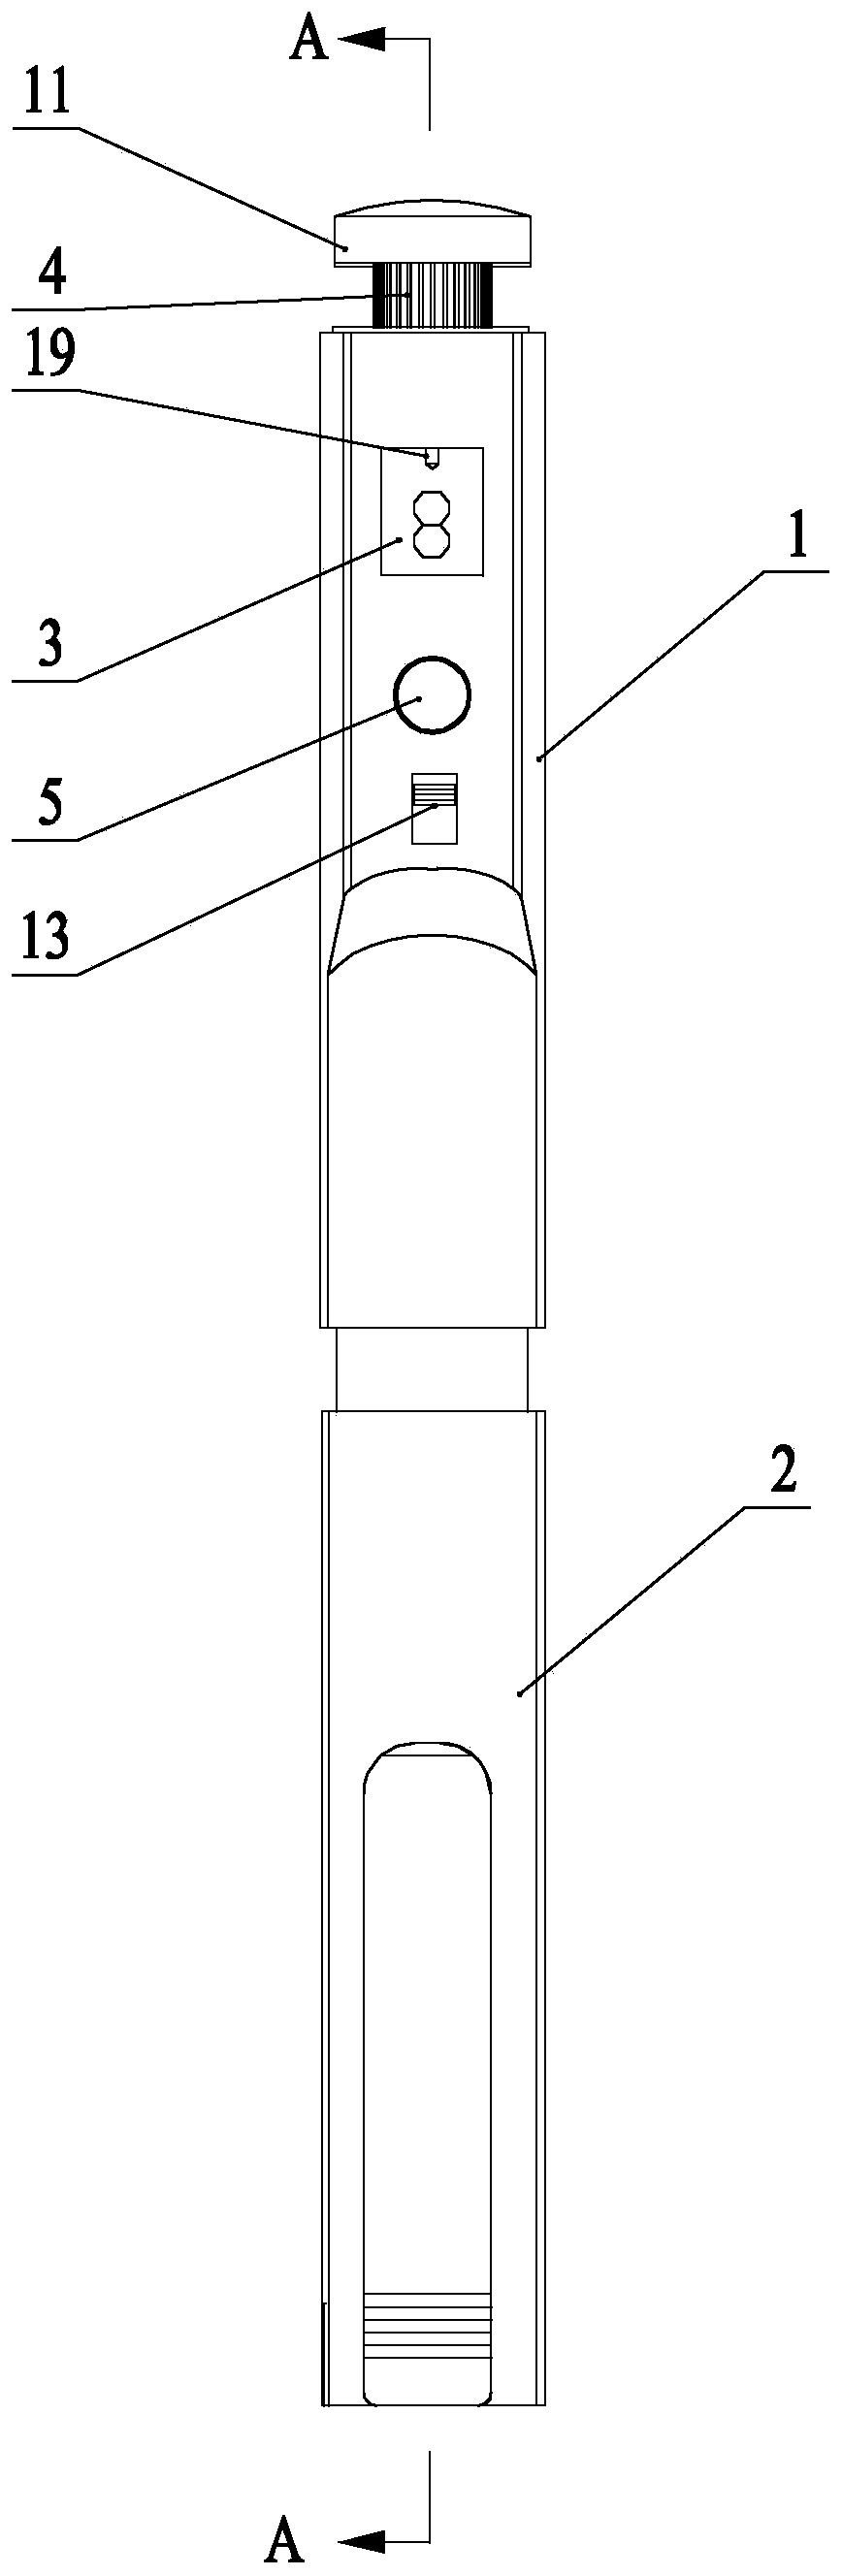 Insulin injection pen with light flashing prompting function